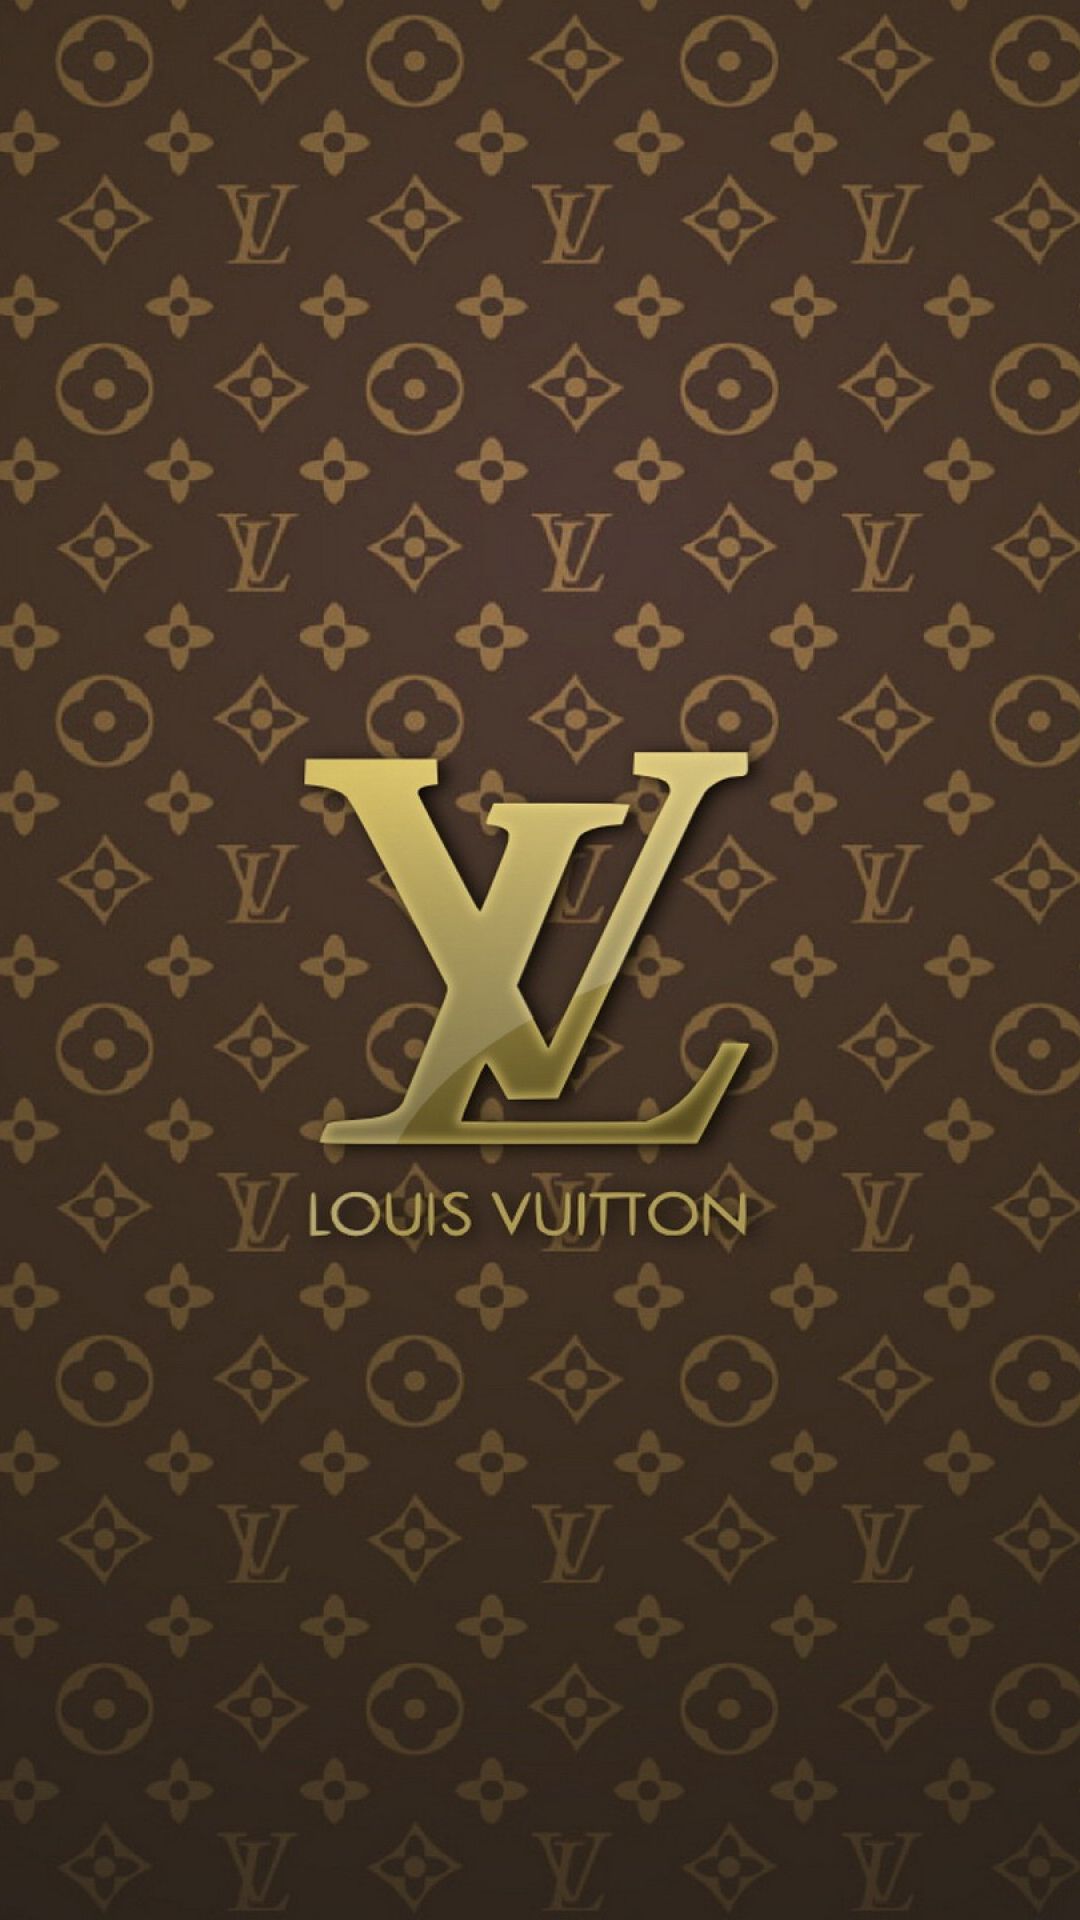 Louis vuitton iphone wallpapers